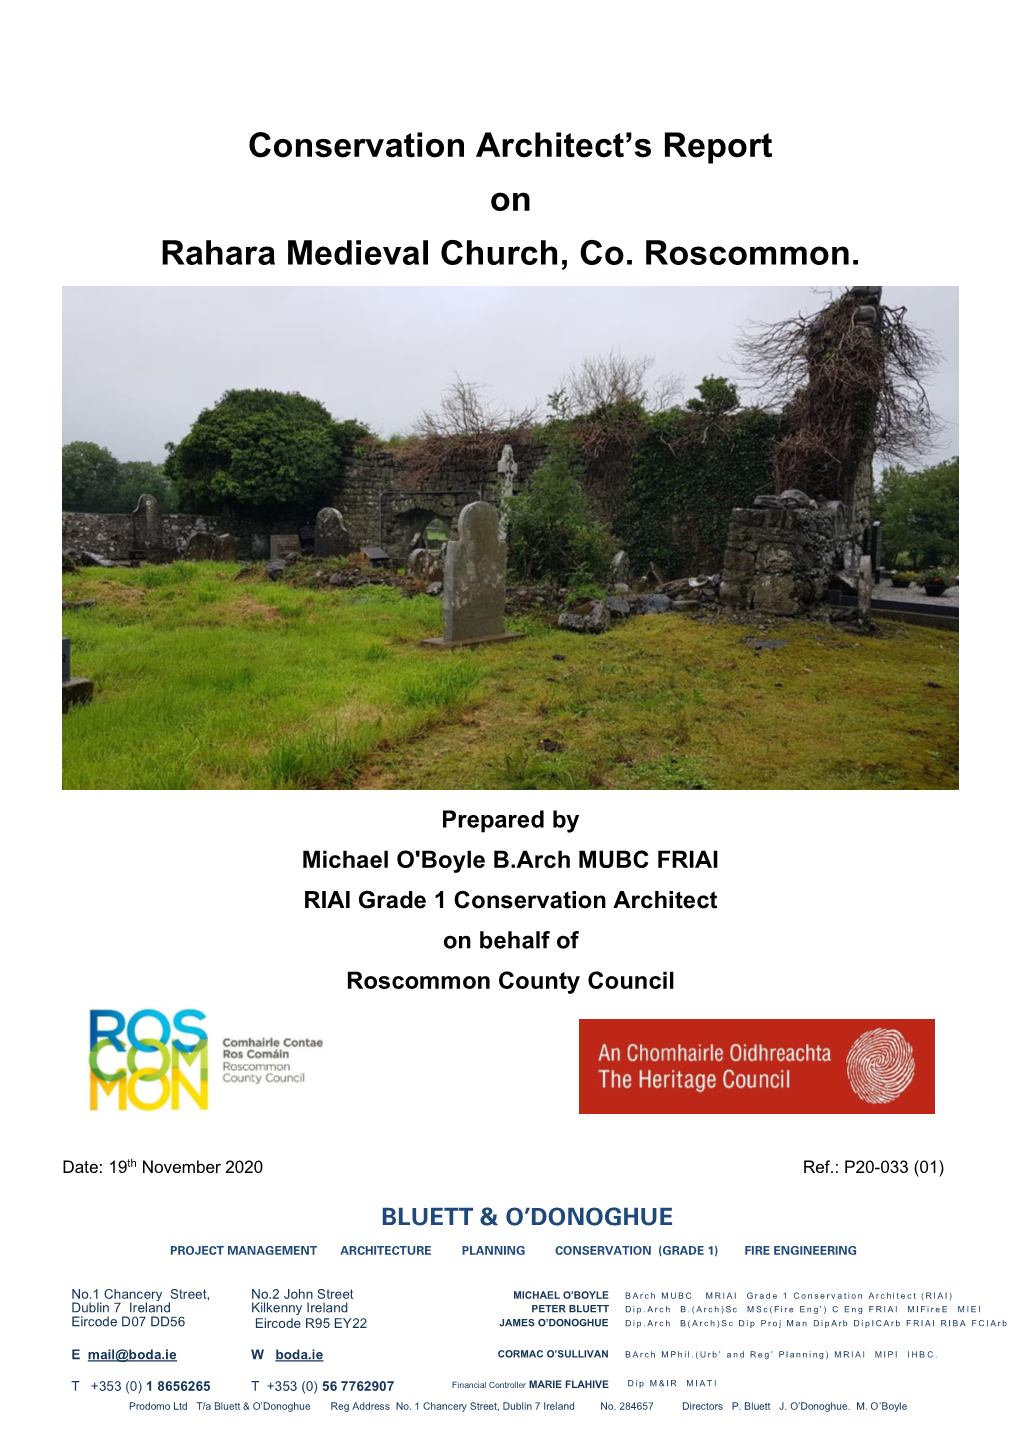 Conservation Architect's Report on Rahara Medieval Church, Co